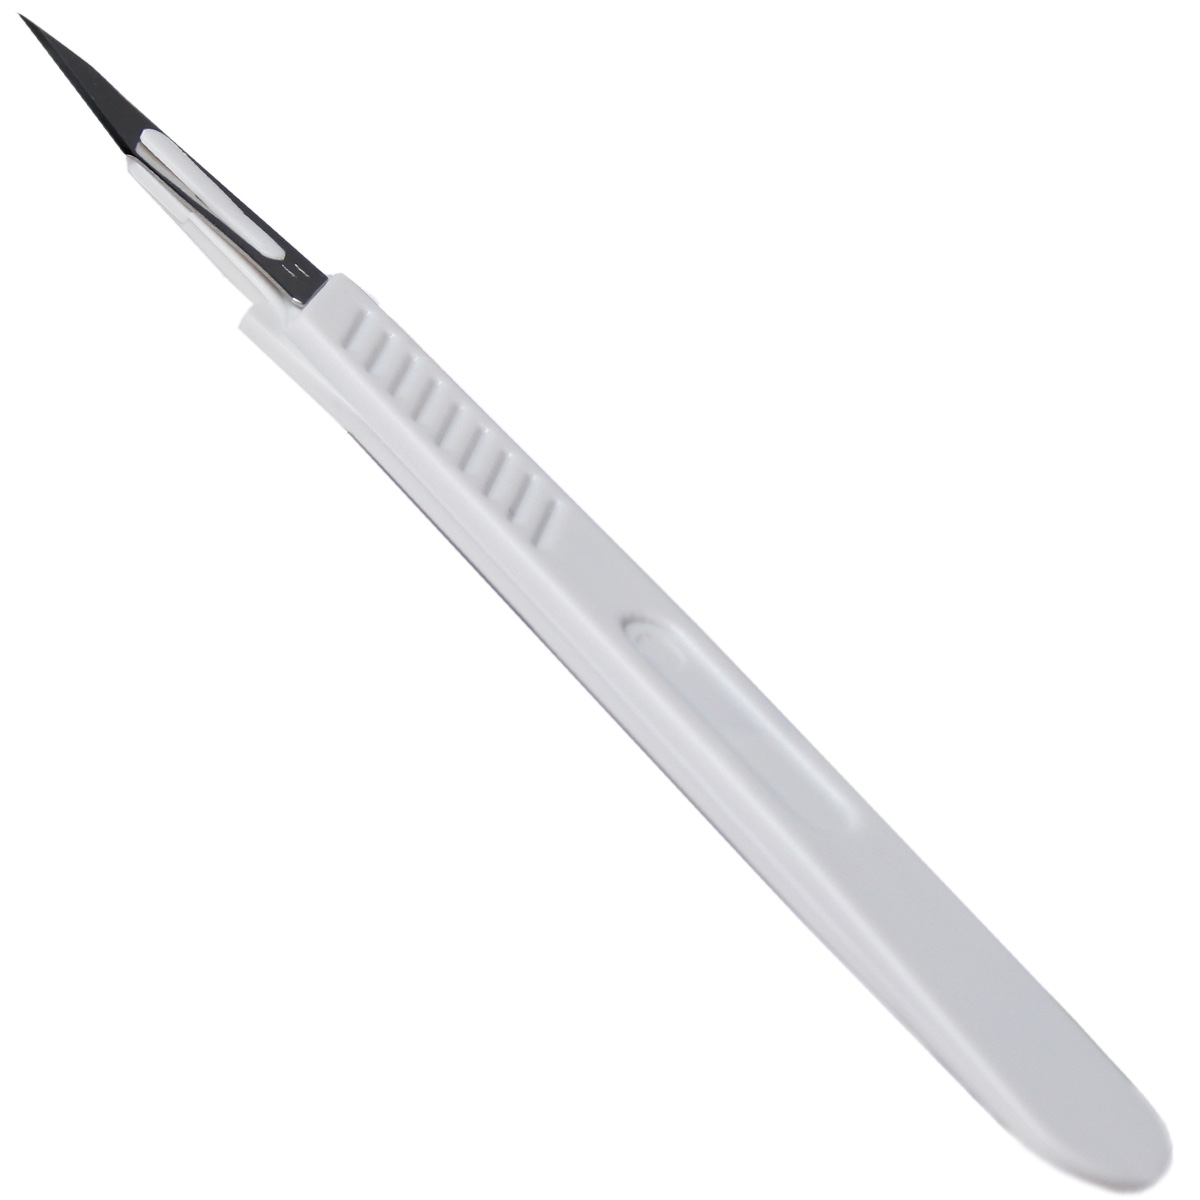 Picture for Disposable Scalpel, pack of 10